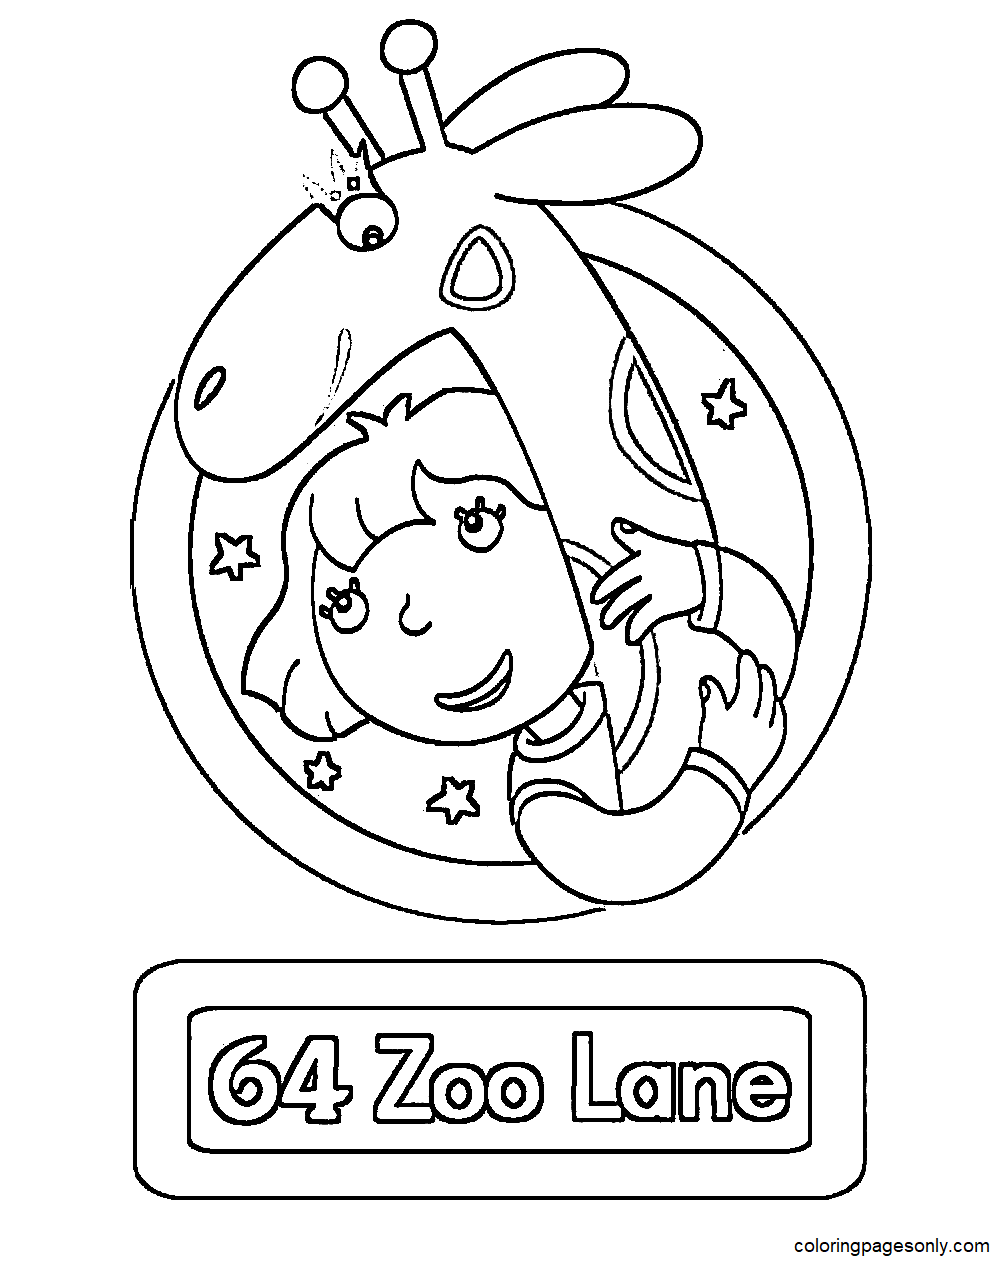 Free Printable 64 Zoo Lane Coloring Pages